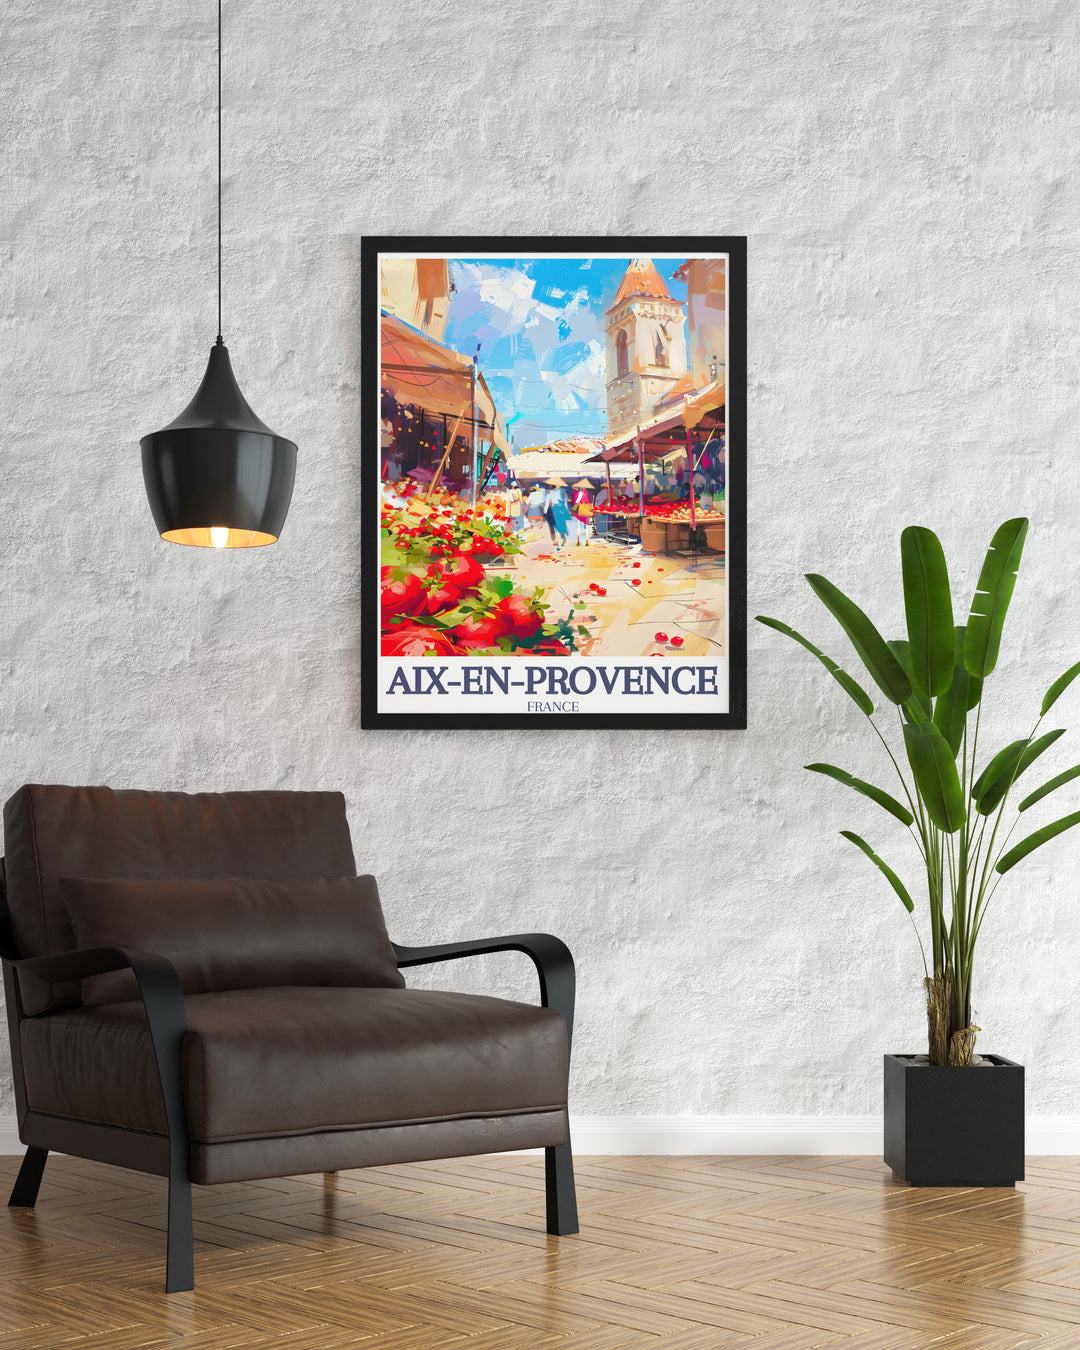 Captivating photo decor of Aix market Town Hall Square highlighting the bustling market atmosphere and historic charm ideal for gifts and adding a touch of France to your home